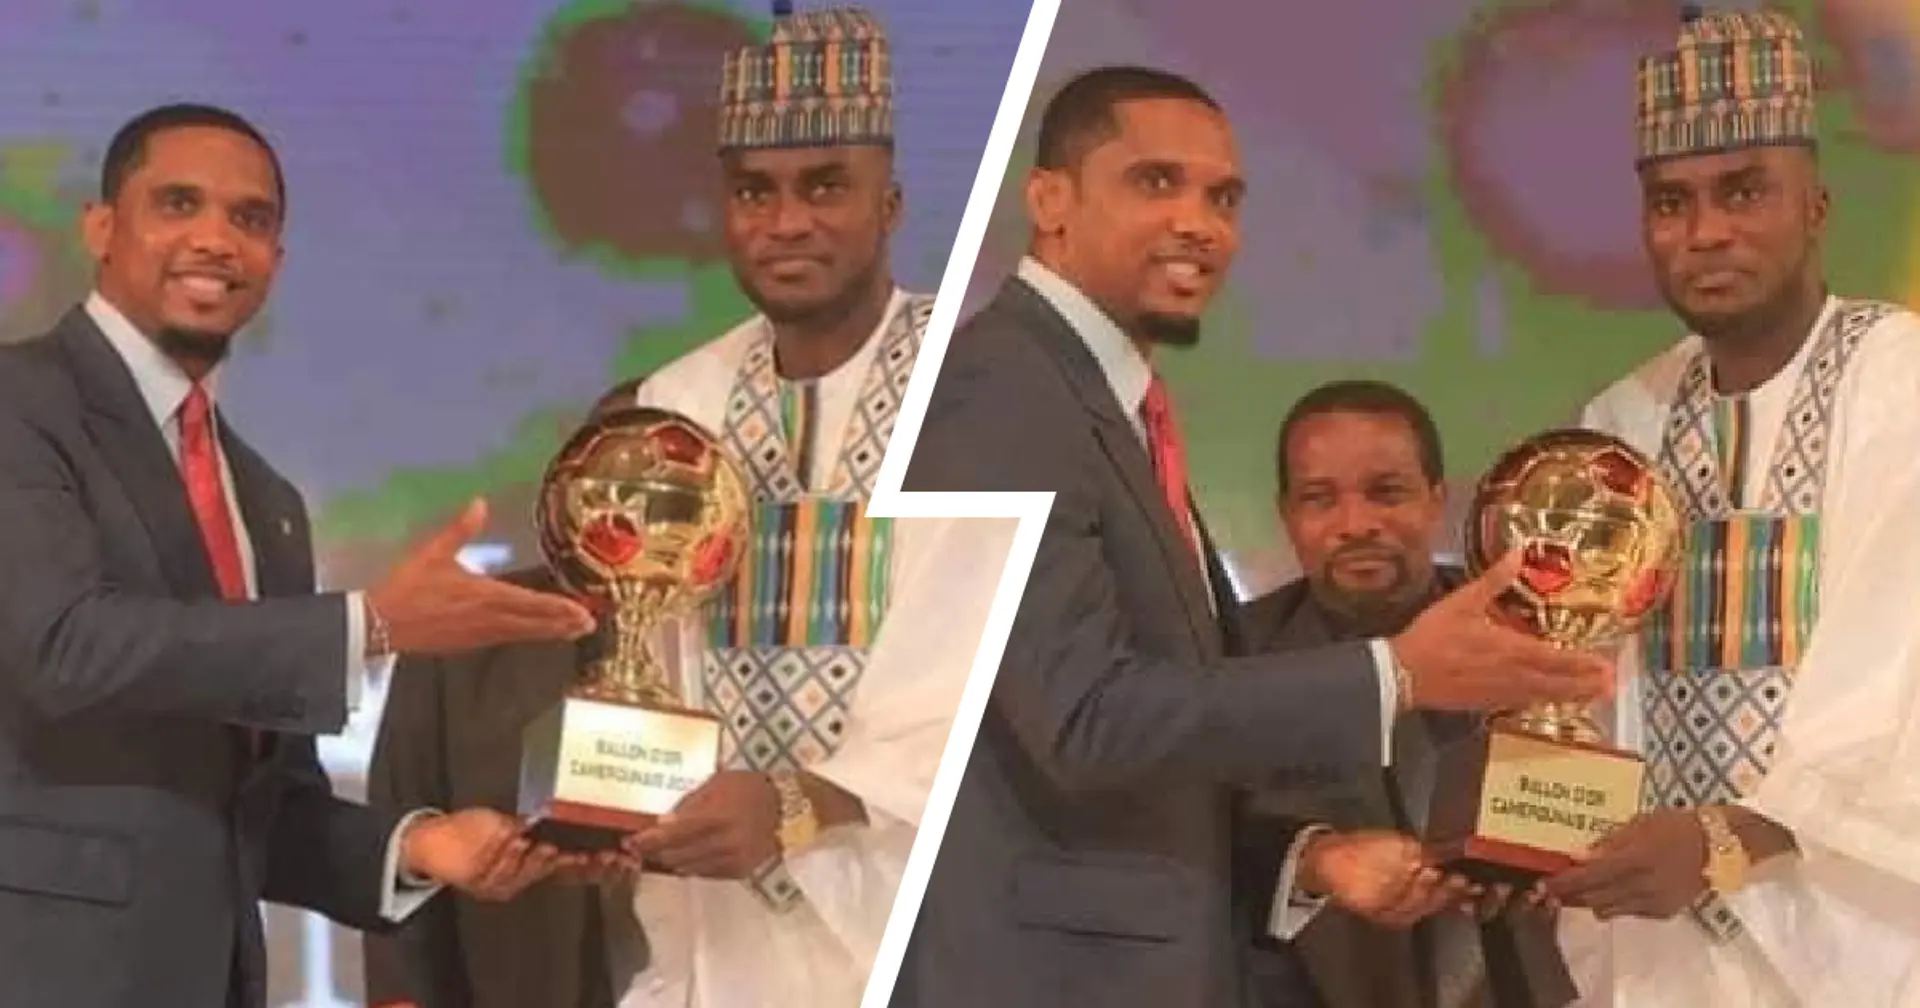 Spotted: Samuel Eto'o hands out Ballon d'Or to best Cameroonian footballer in 2022